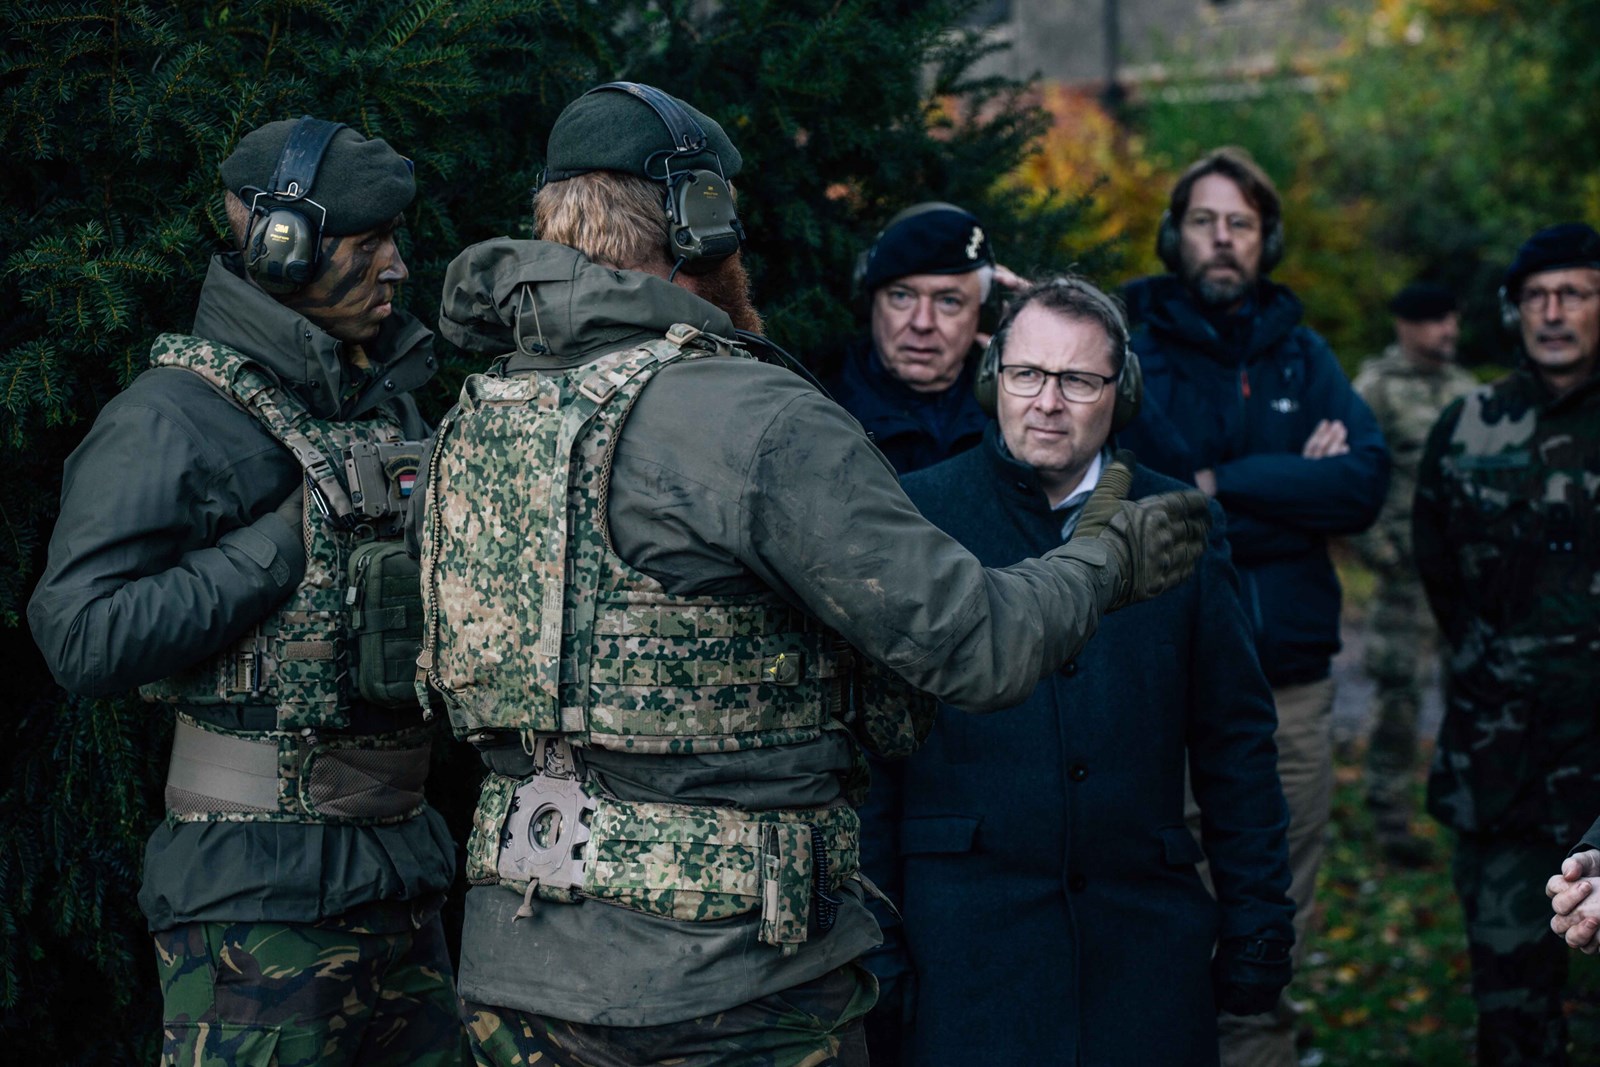 The Minister of Defense visits Norwegian personnel training Ukrainian troops in Great Britain